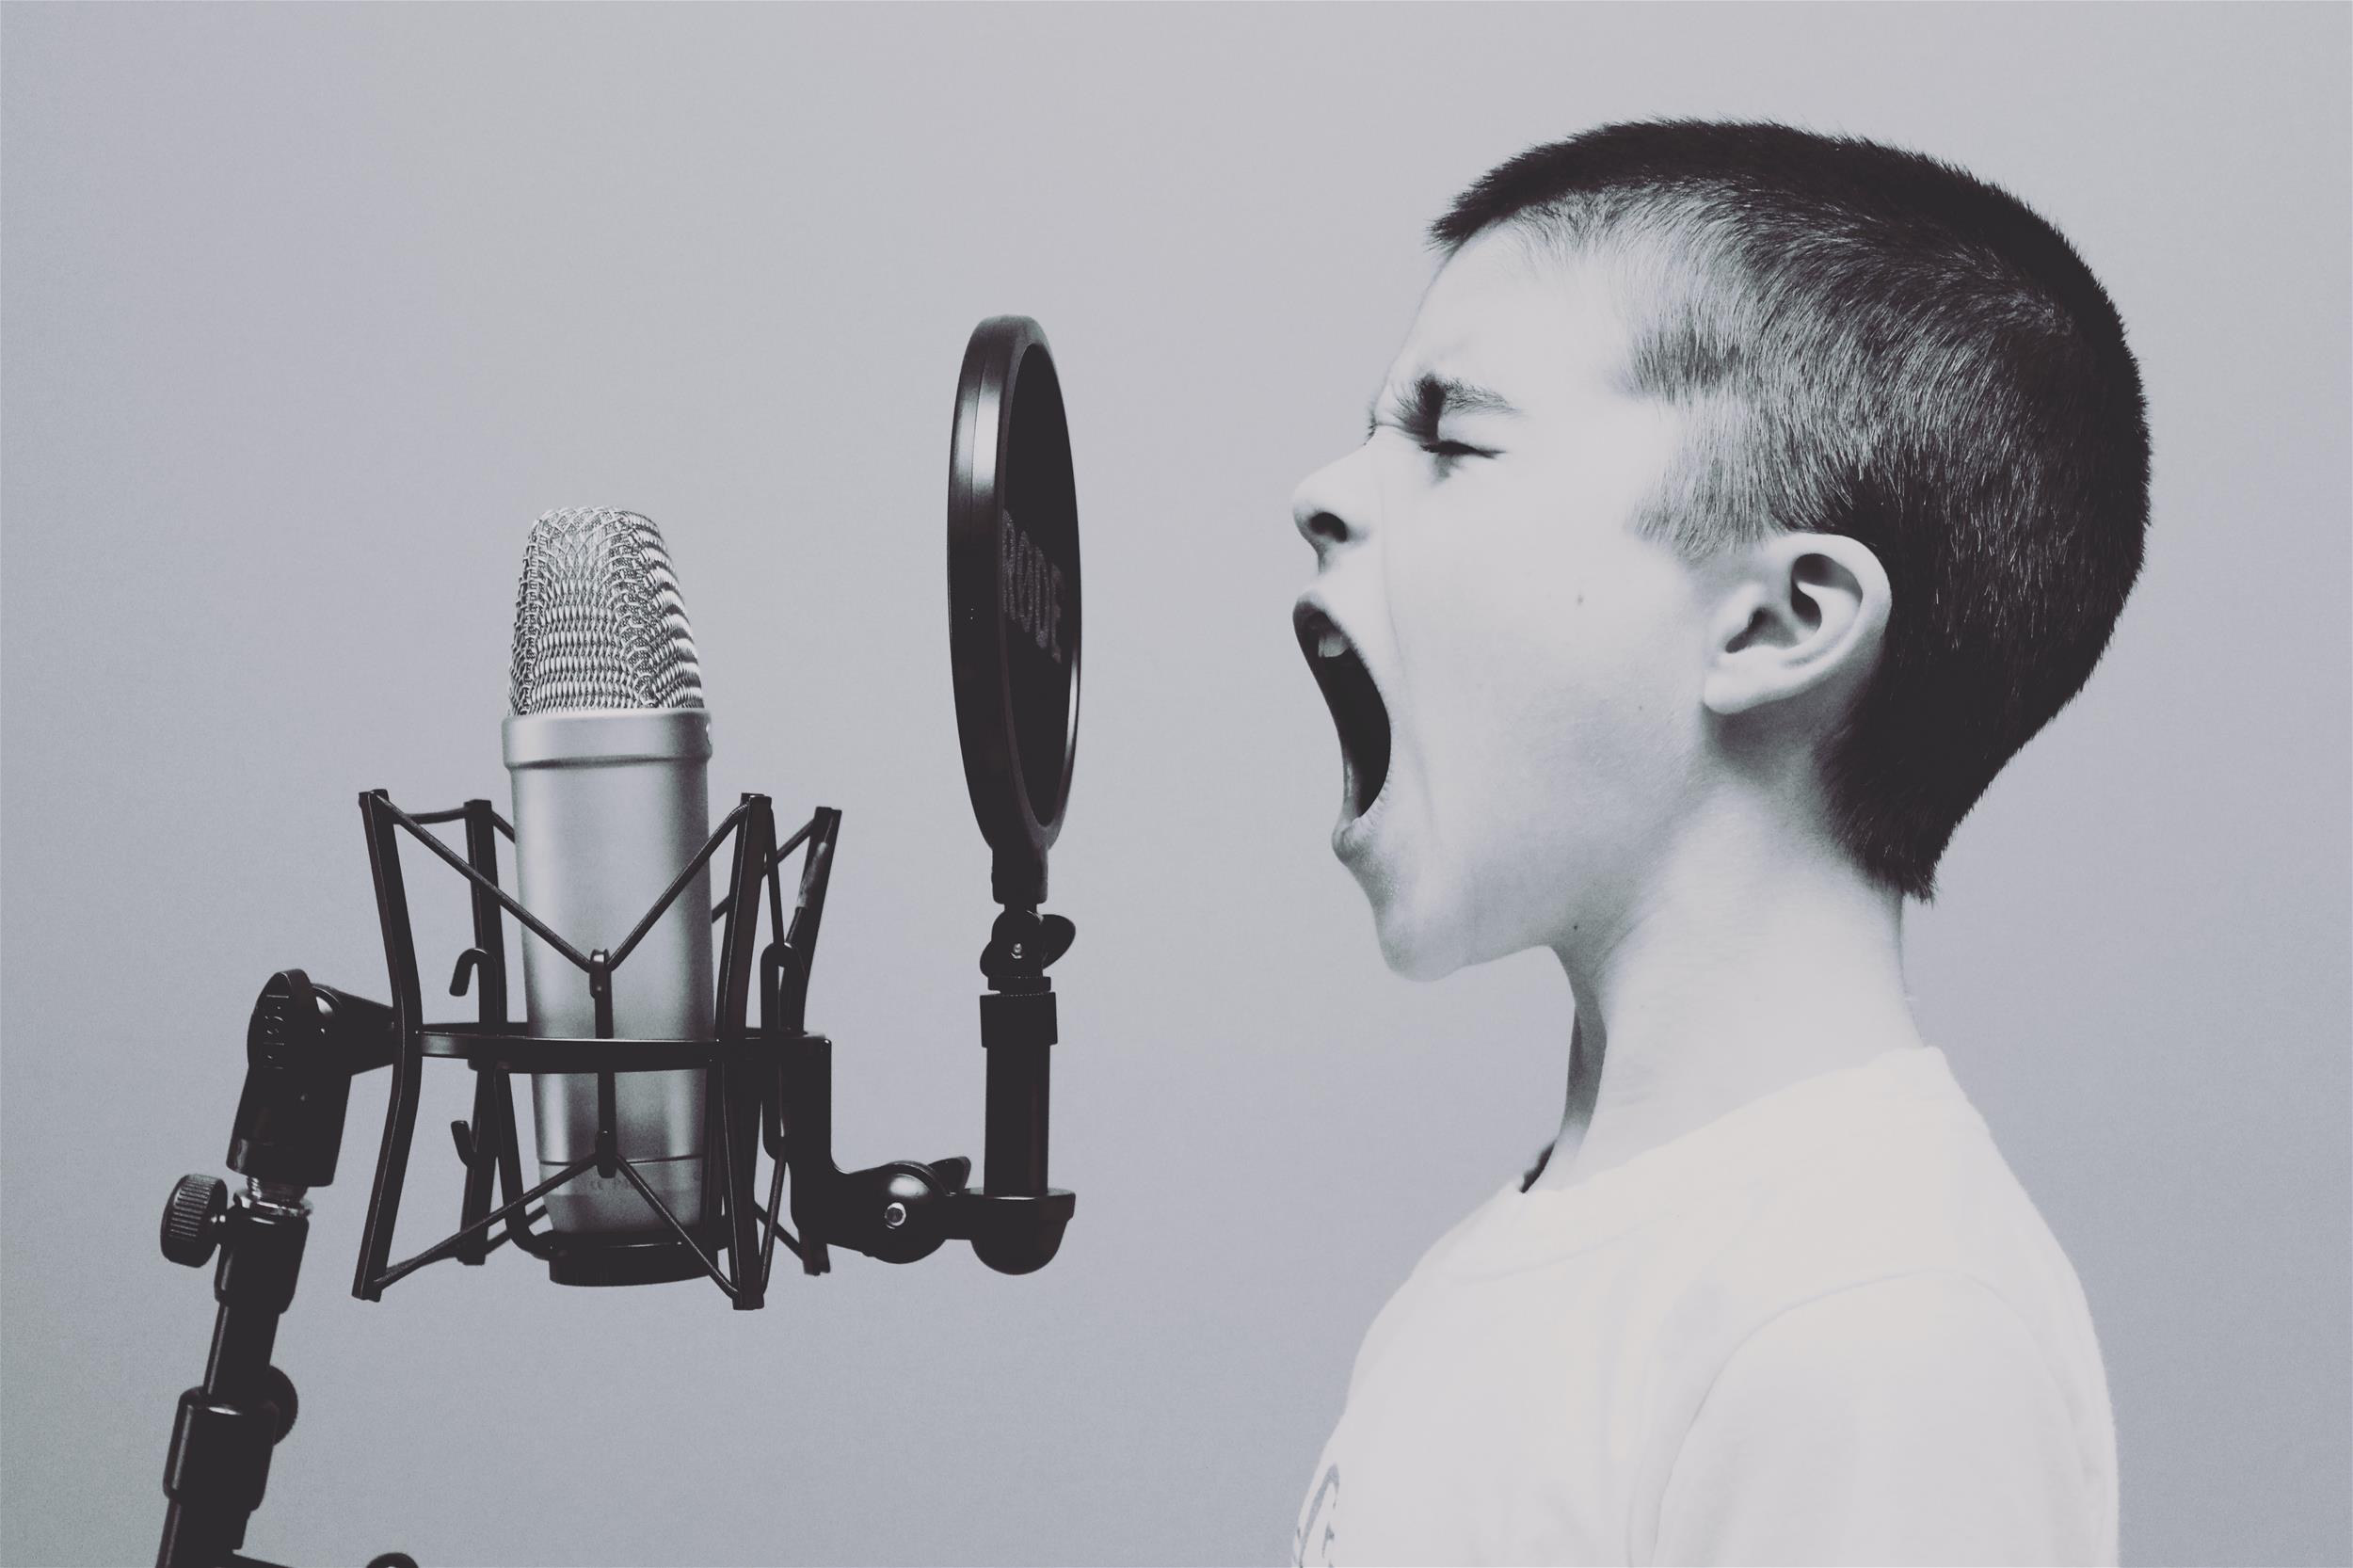 Young boy shouting into a recording microphone